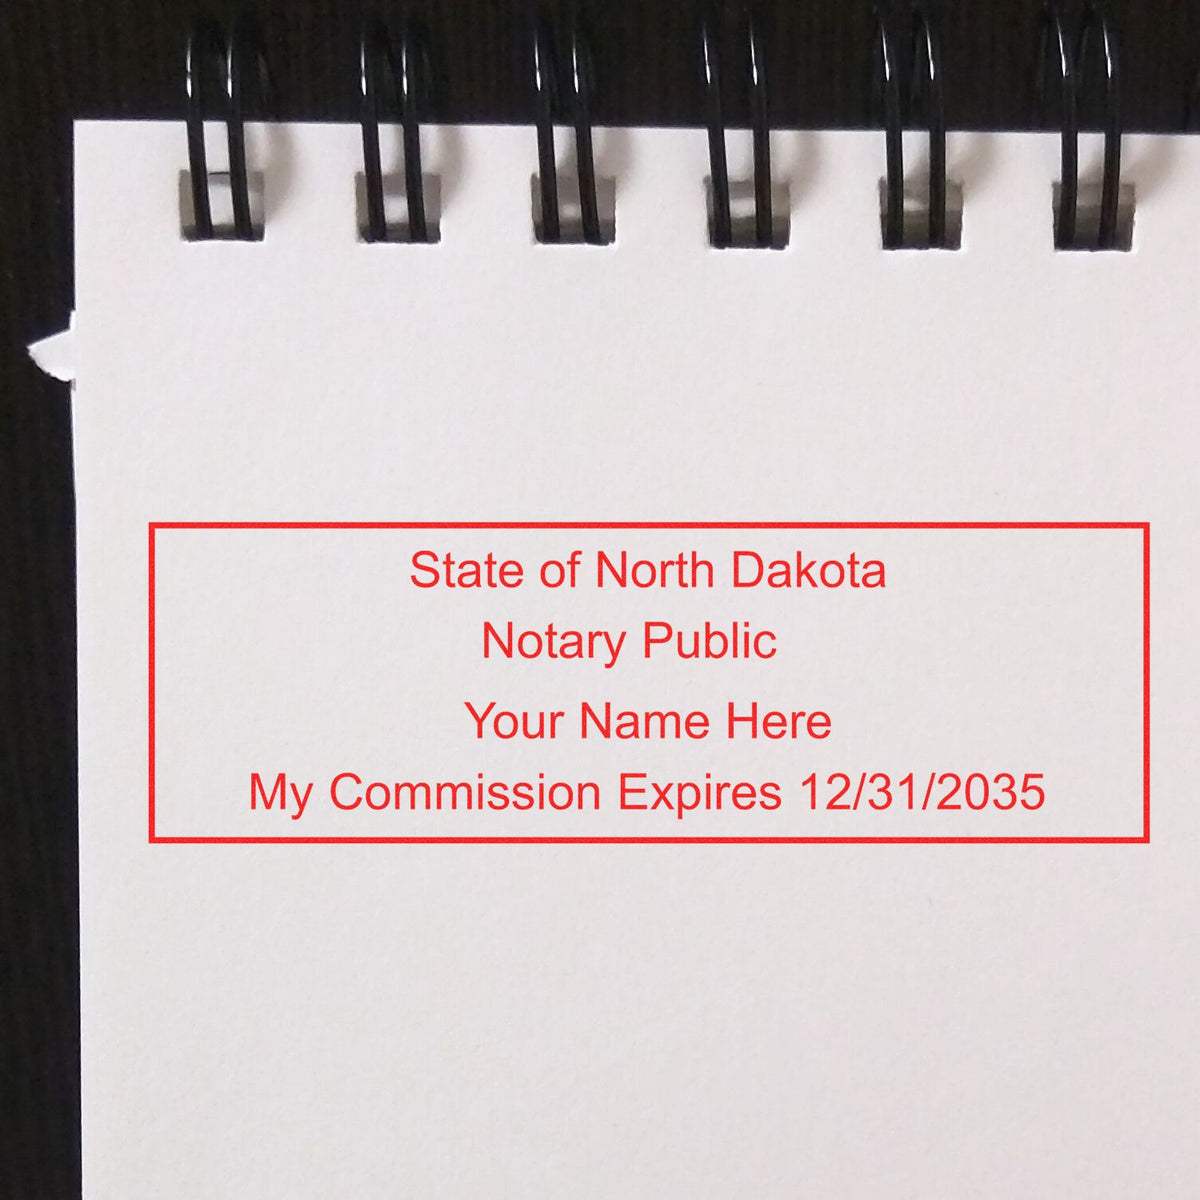 The Heavy-Duty North Dakota Rectangular Notary Stamp stamp impression comes to life with a crisp, detailed photo on paper - showcasing true professional quality.